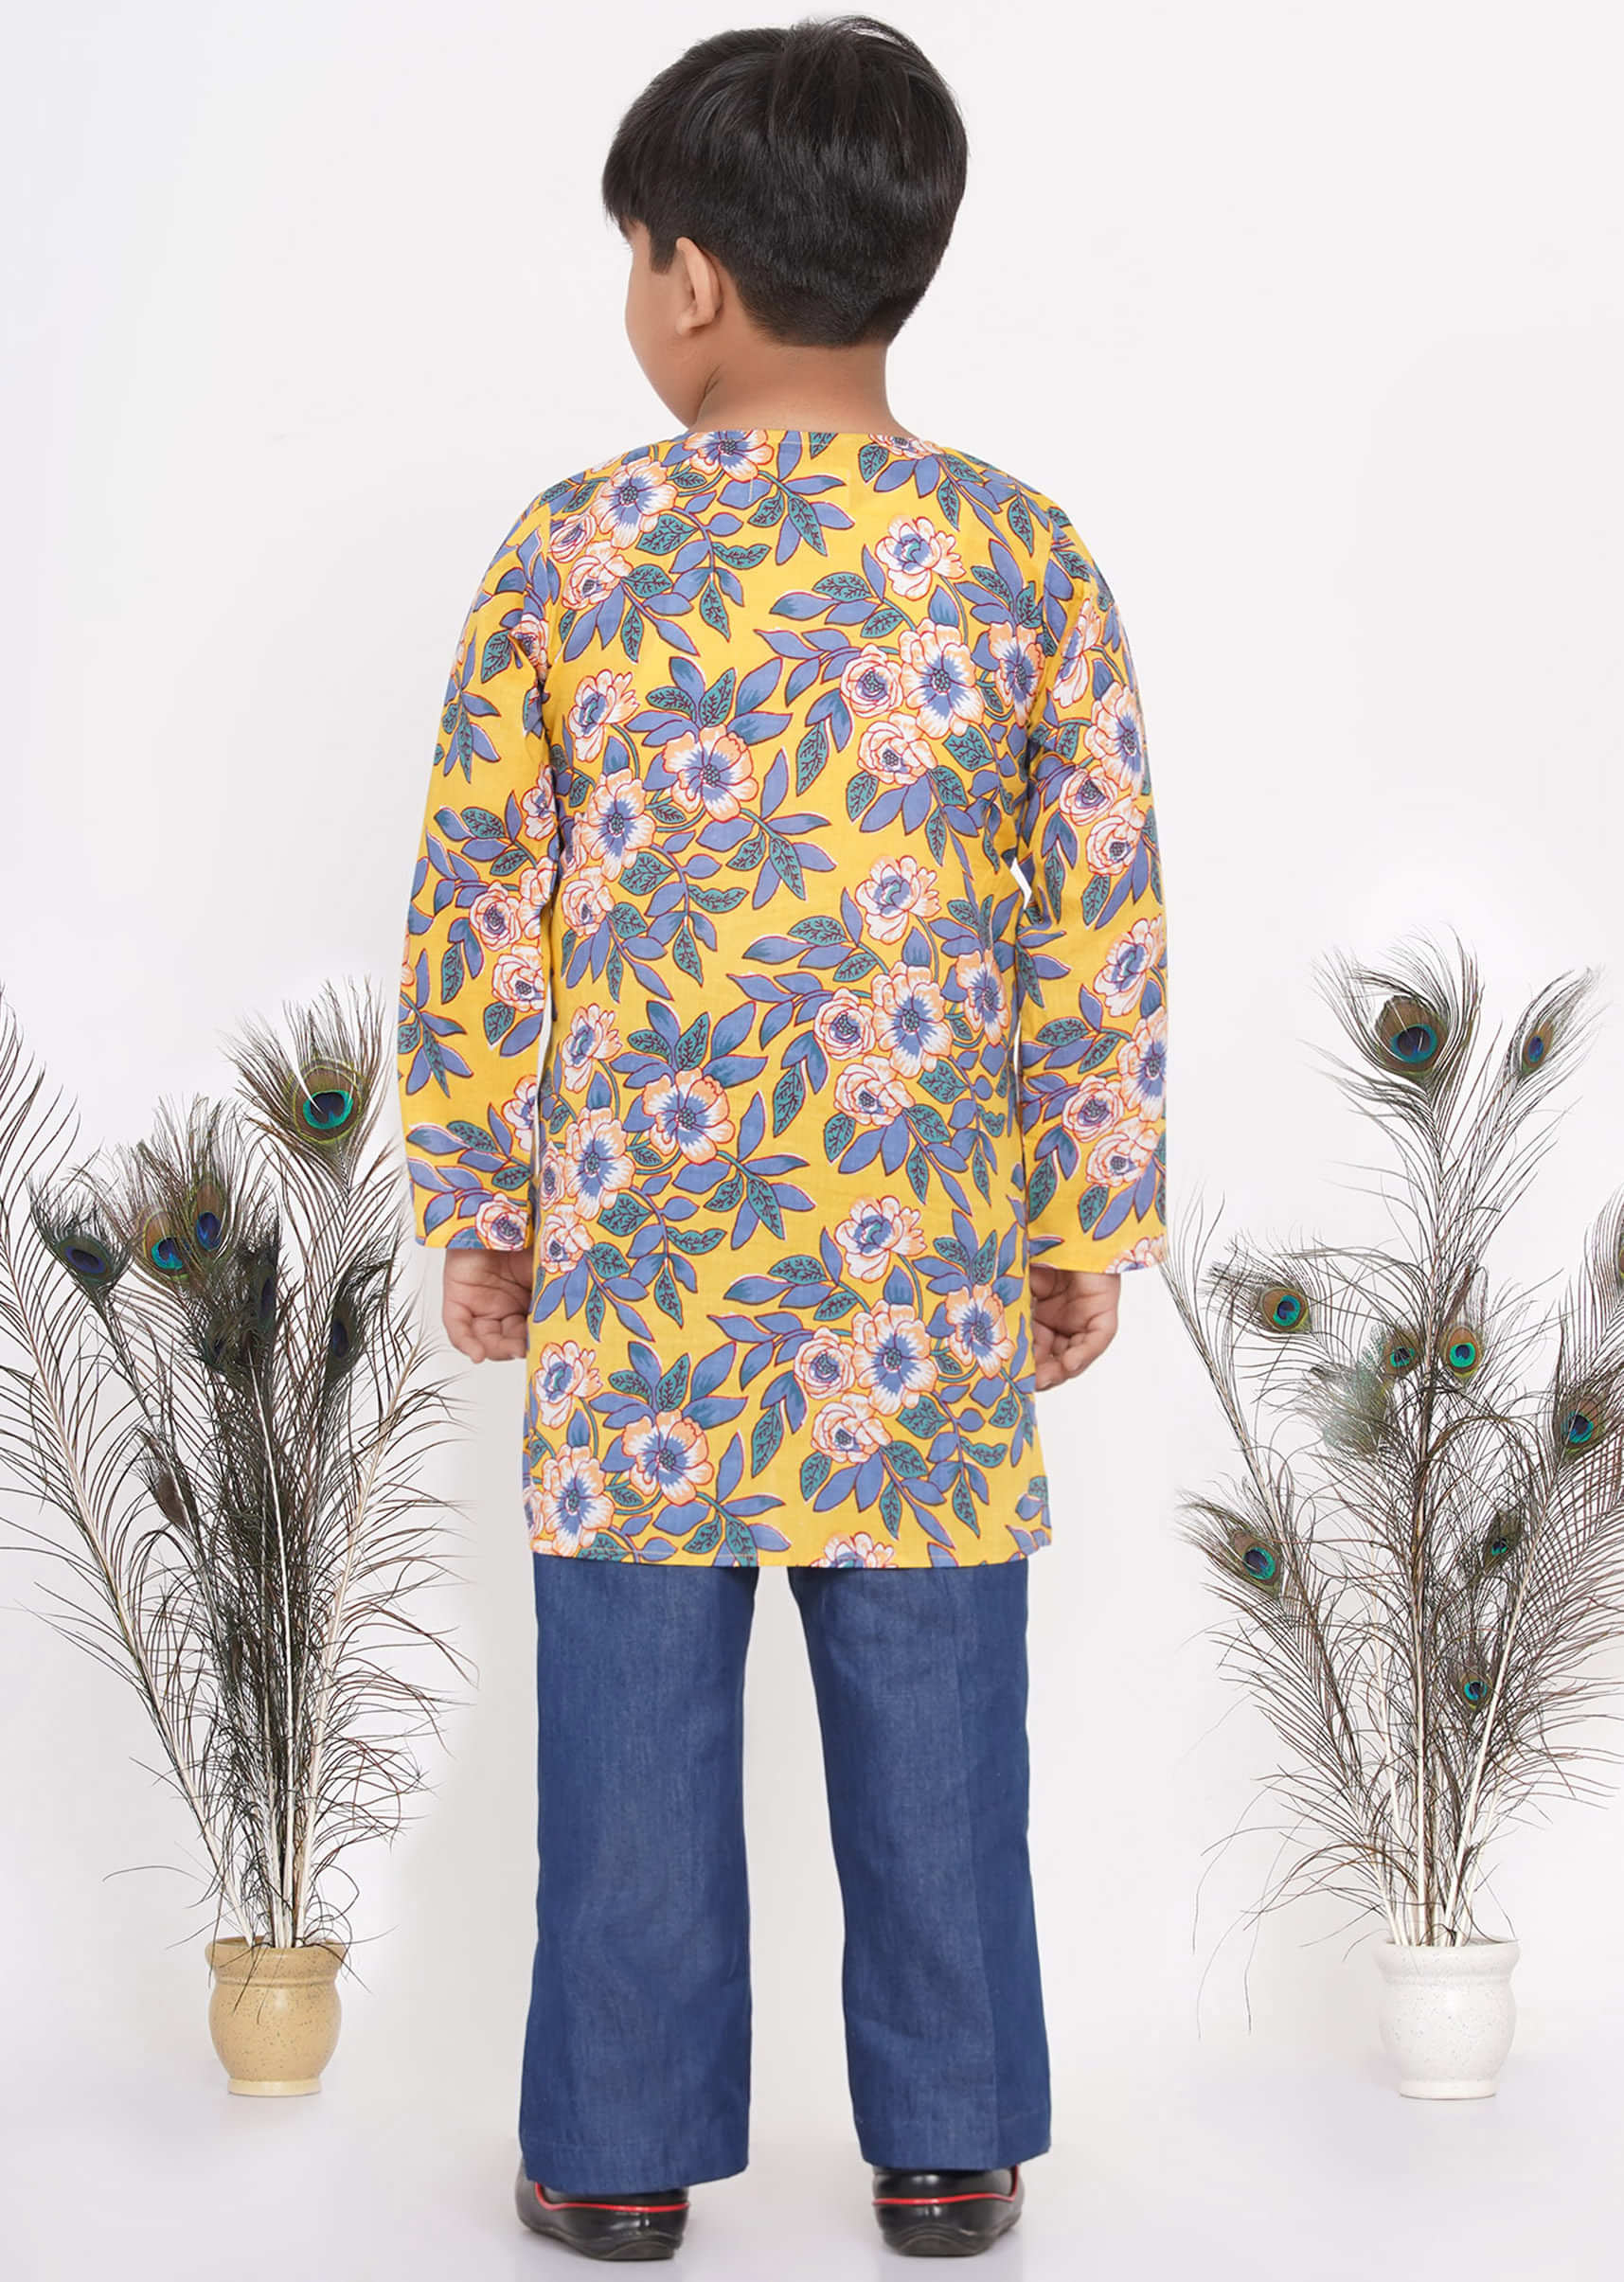 Kalki Cyber Yellow Kurta Set For Boys In Cotton With Floral Print And Denim Blue Trouser Pants